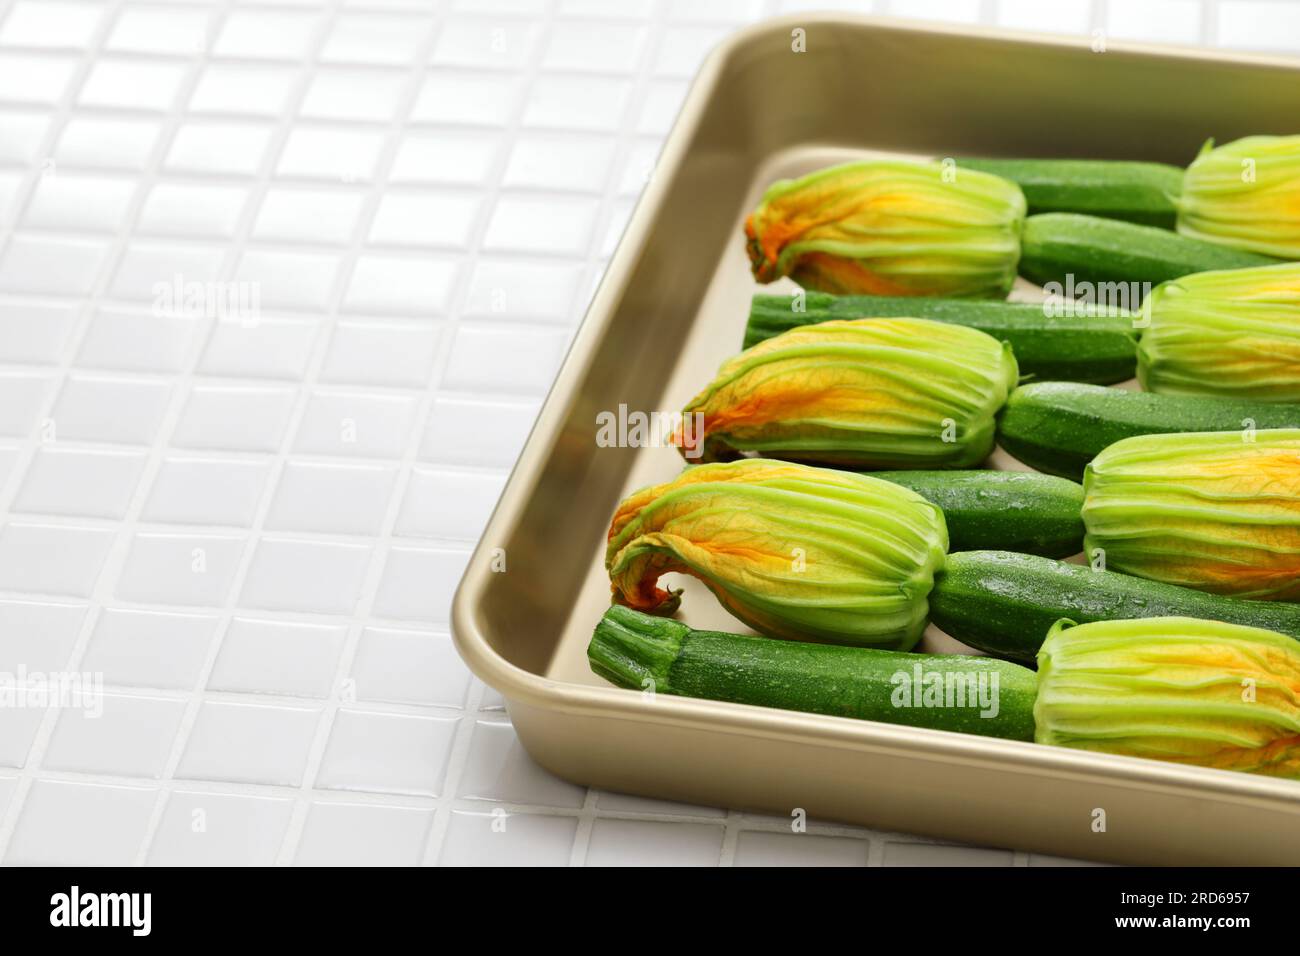 zucchini flowers in a tray, copy space Stock Photo